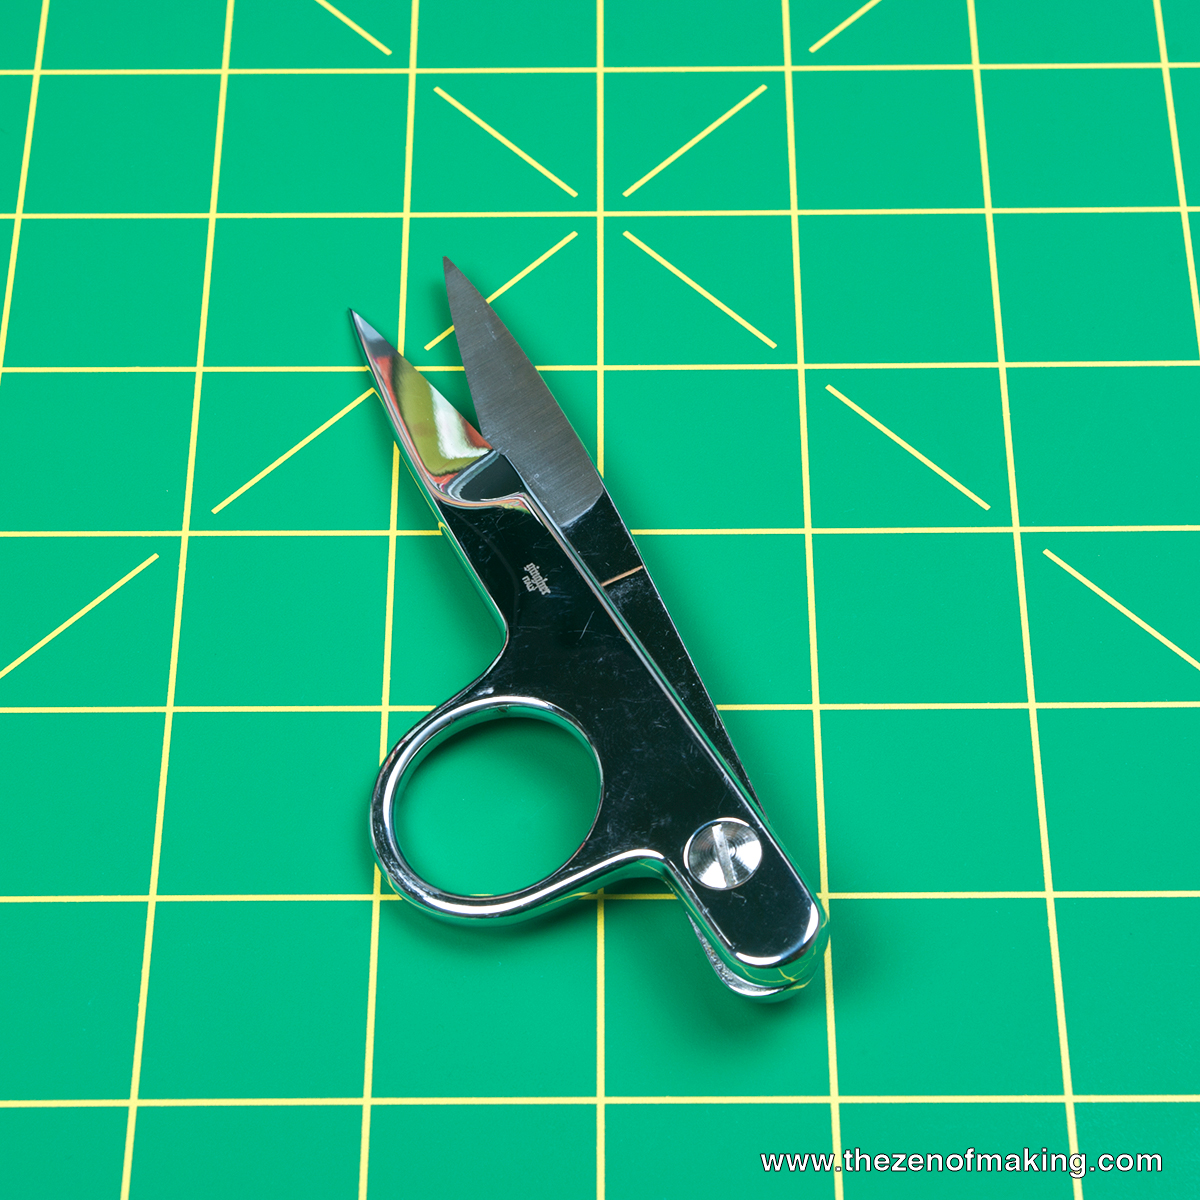 Thread Clippers - Sewing Snips - Thread Nippers - The Spoon Crank